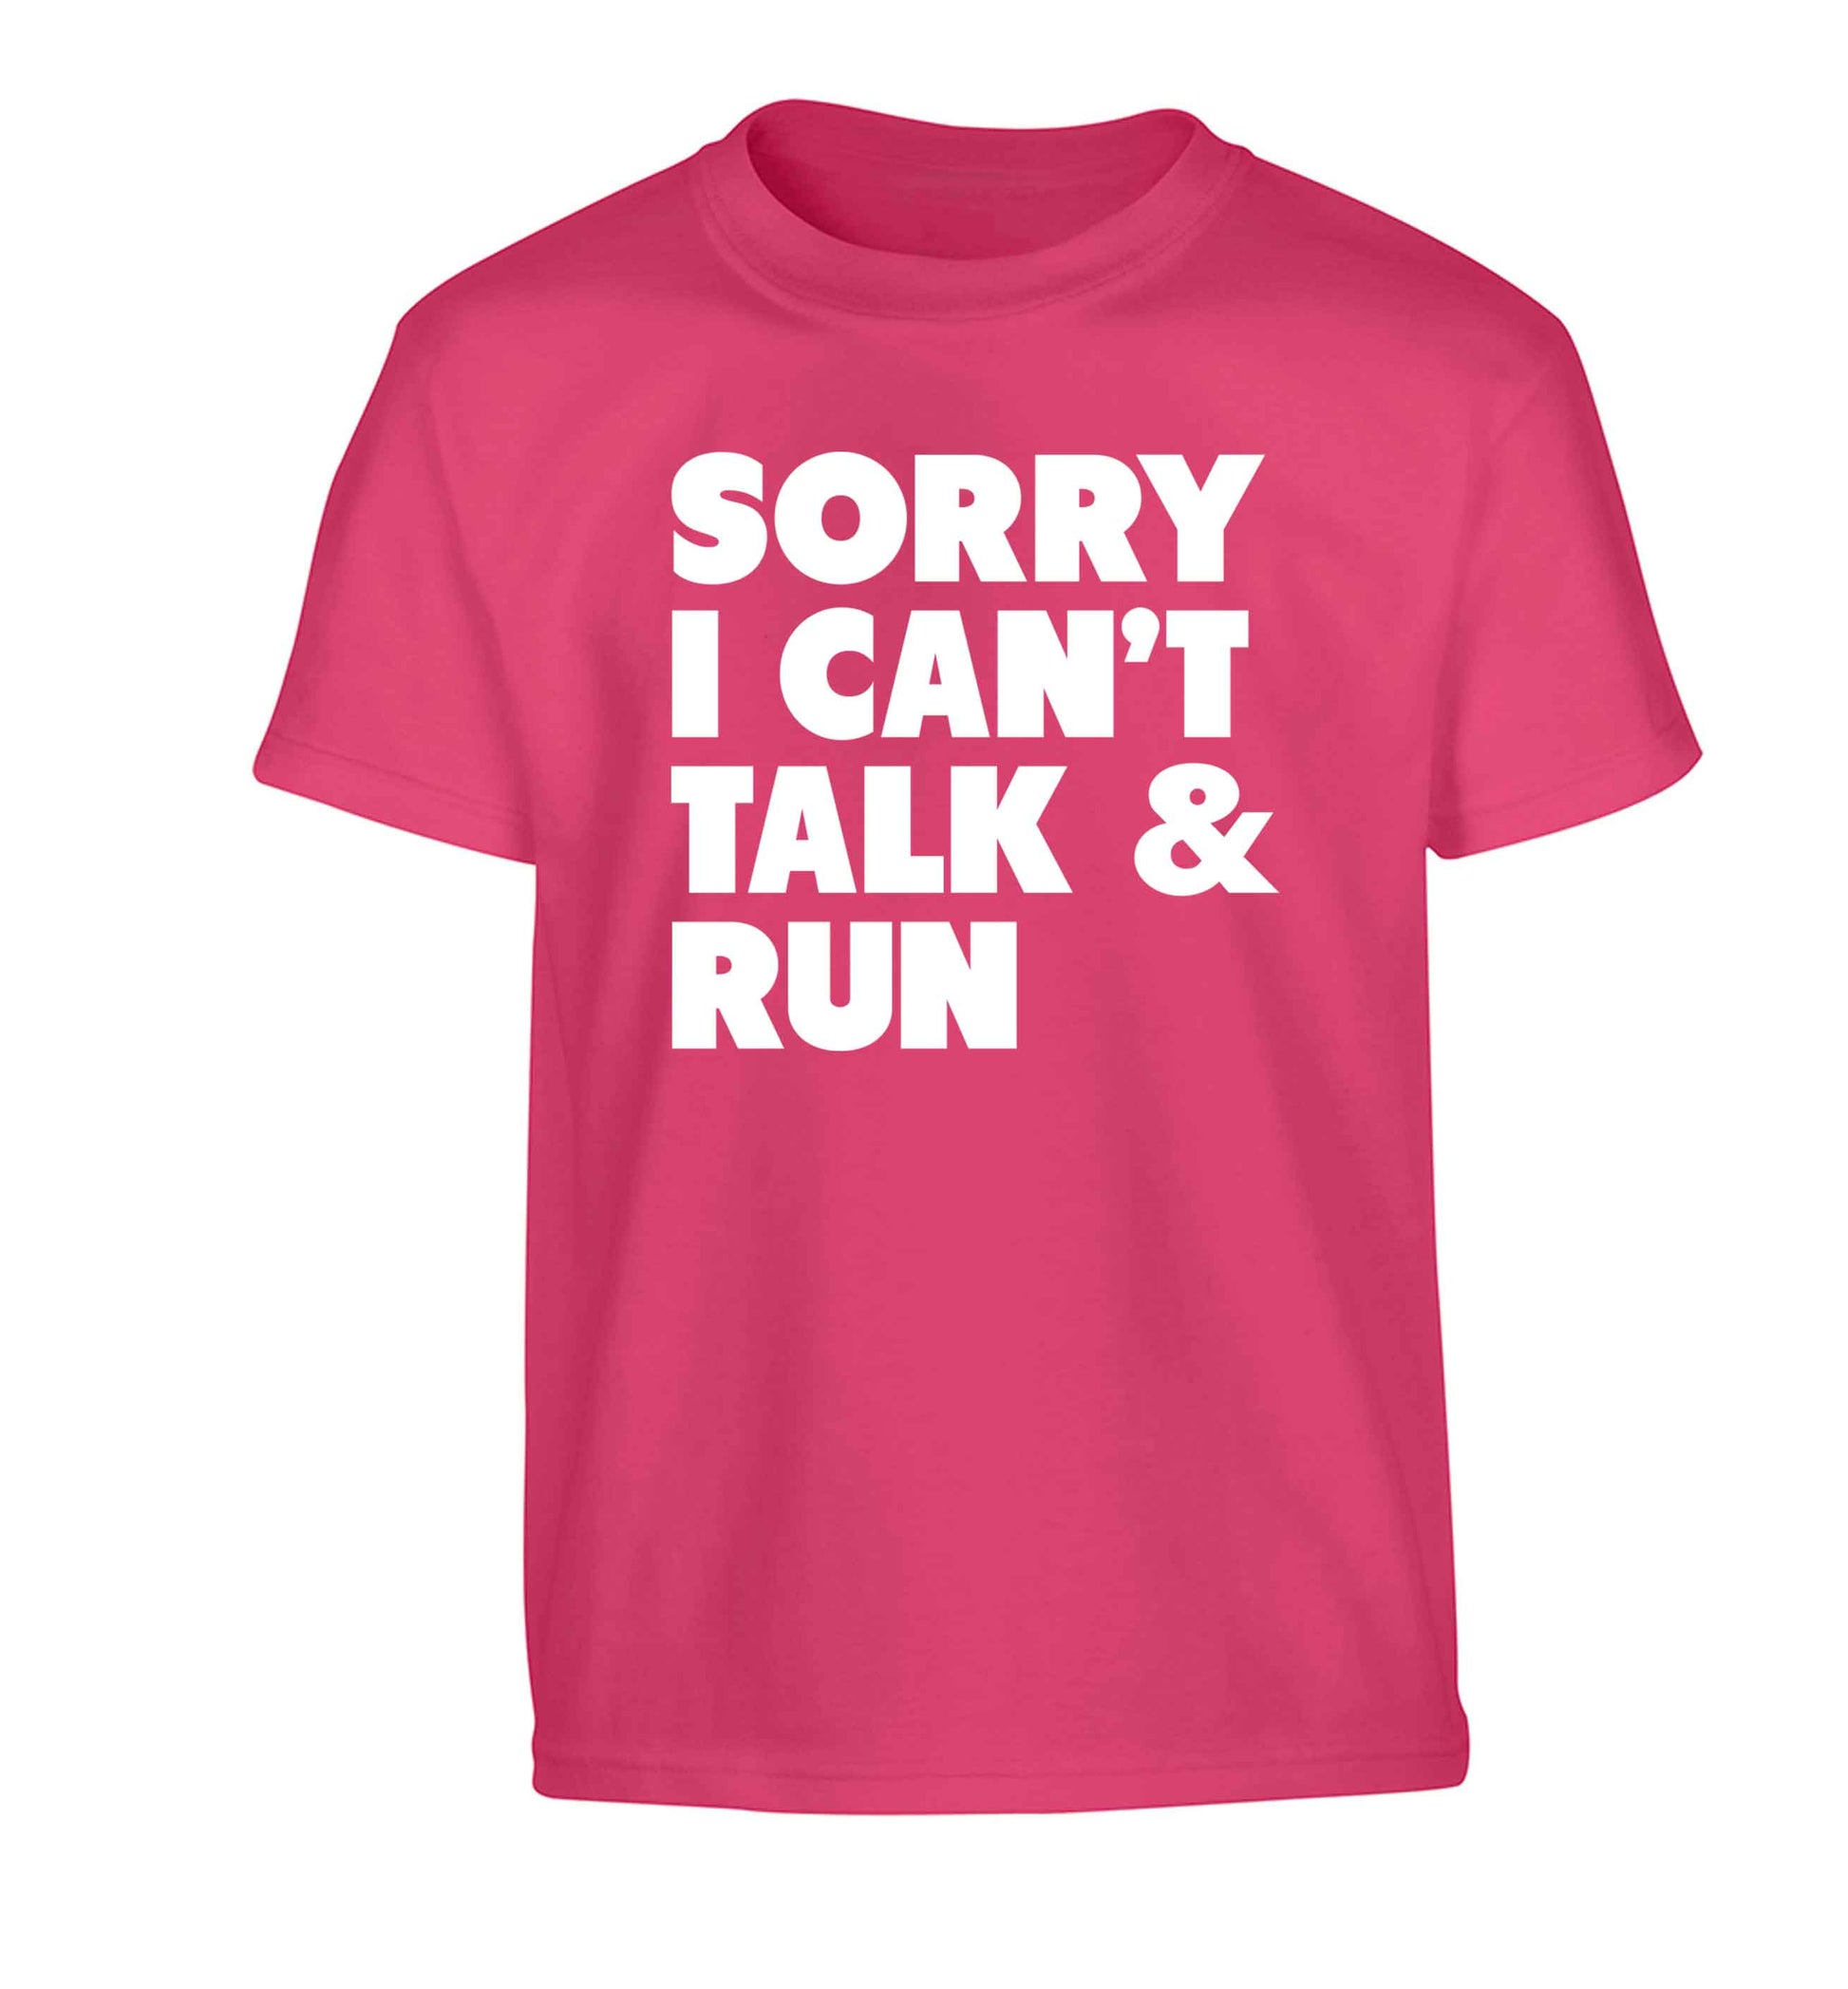 Sorry I can't talk and run Children's pink Tshirt 12-13 Years